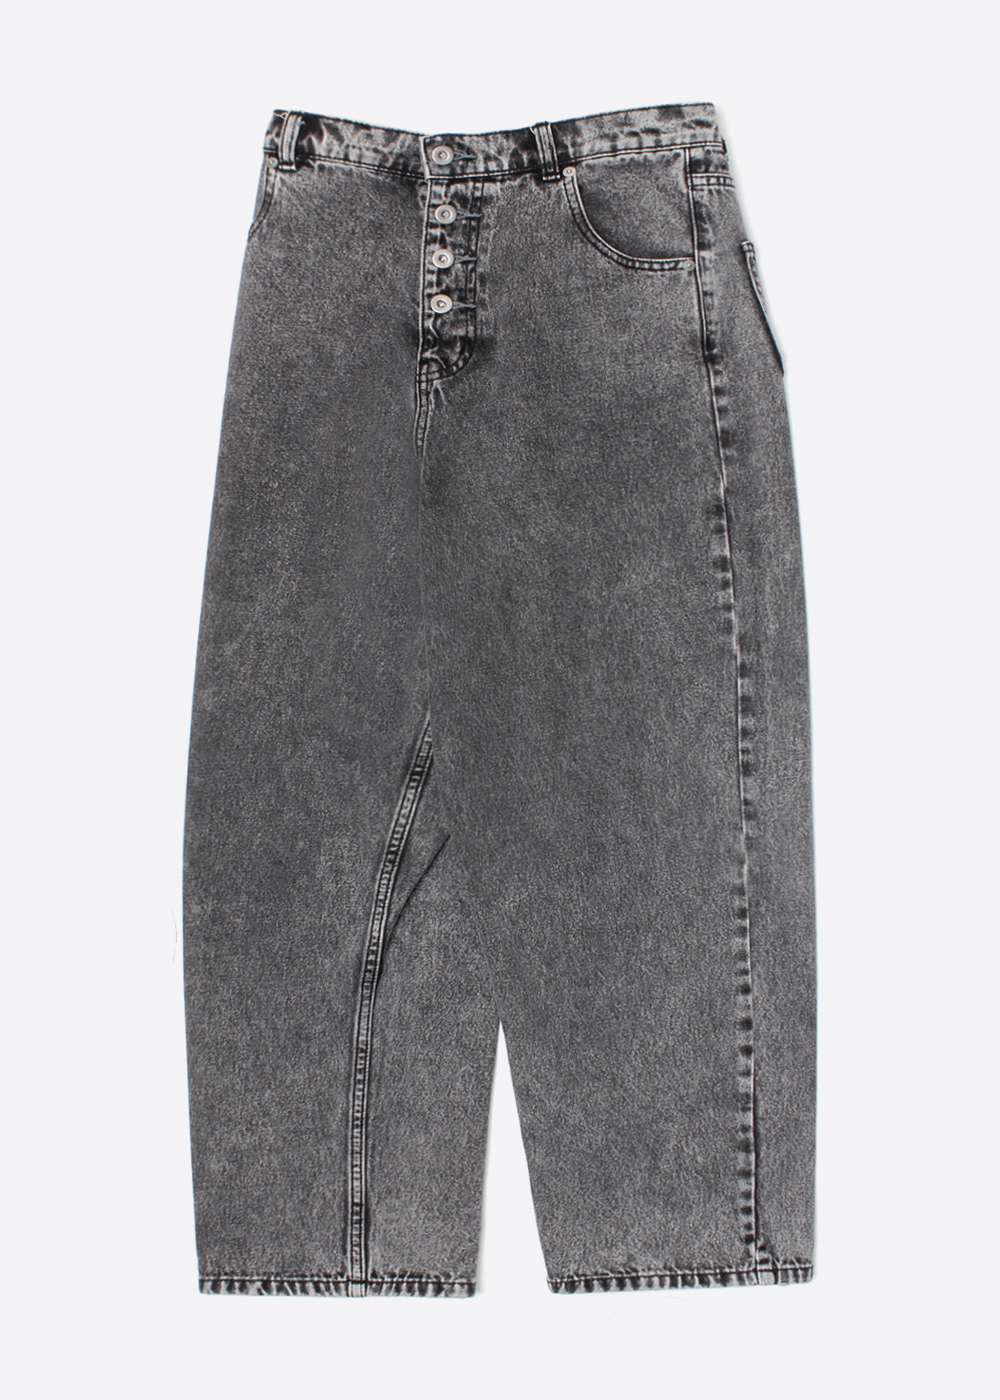 CIAOPANIC TYPY’relax fit’ denim pant